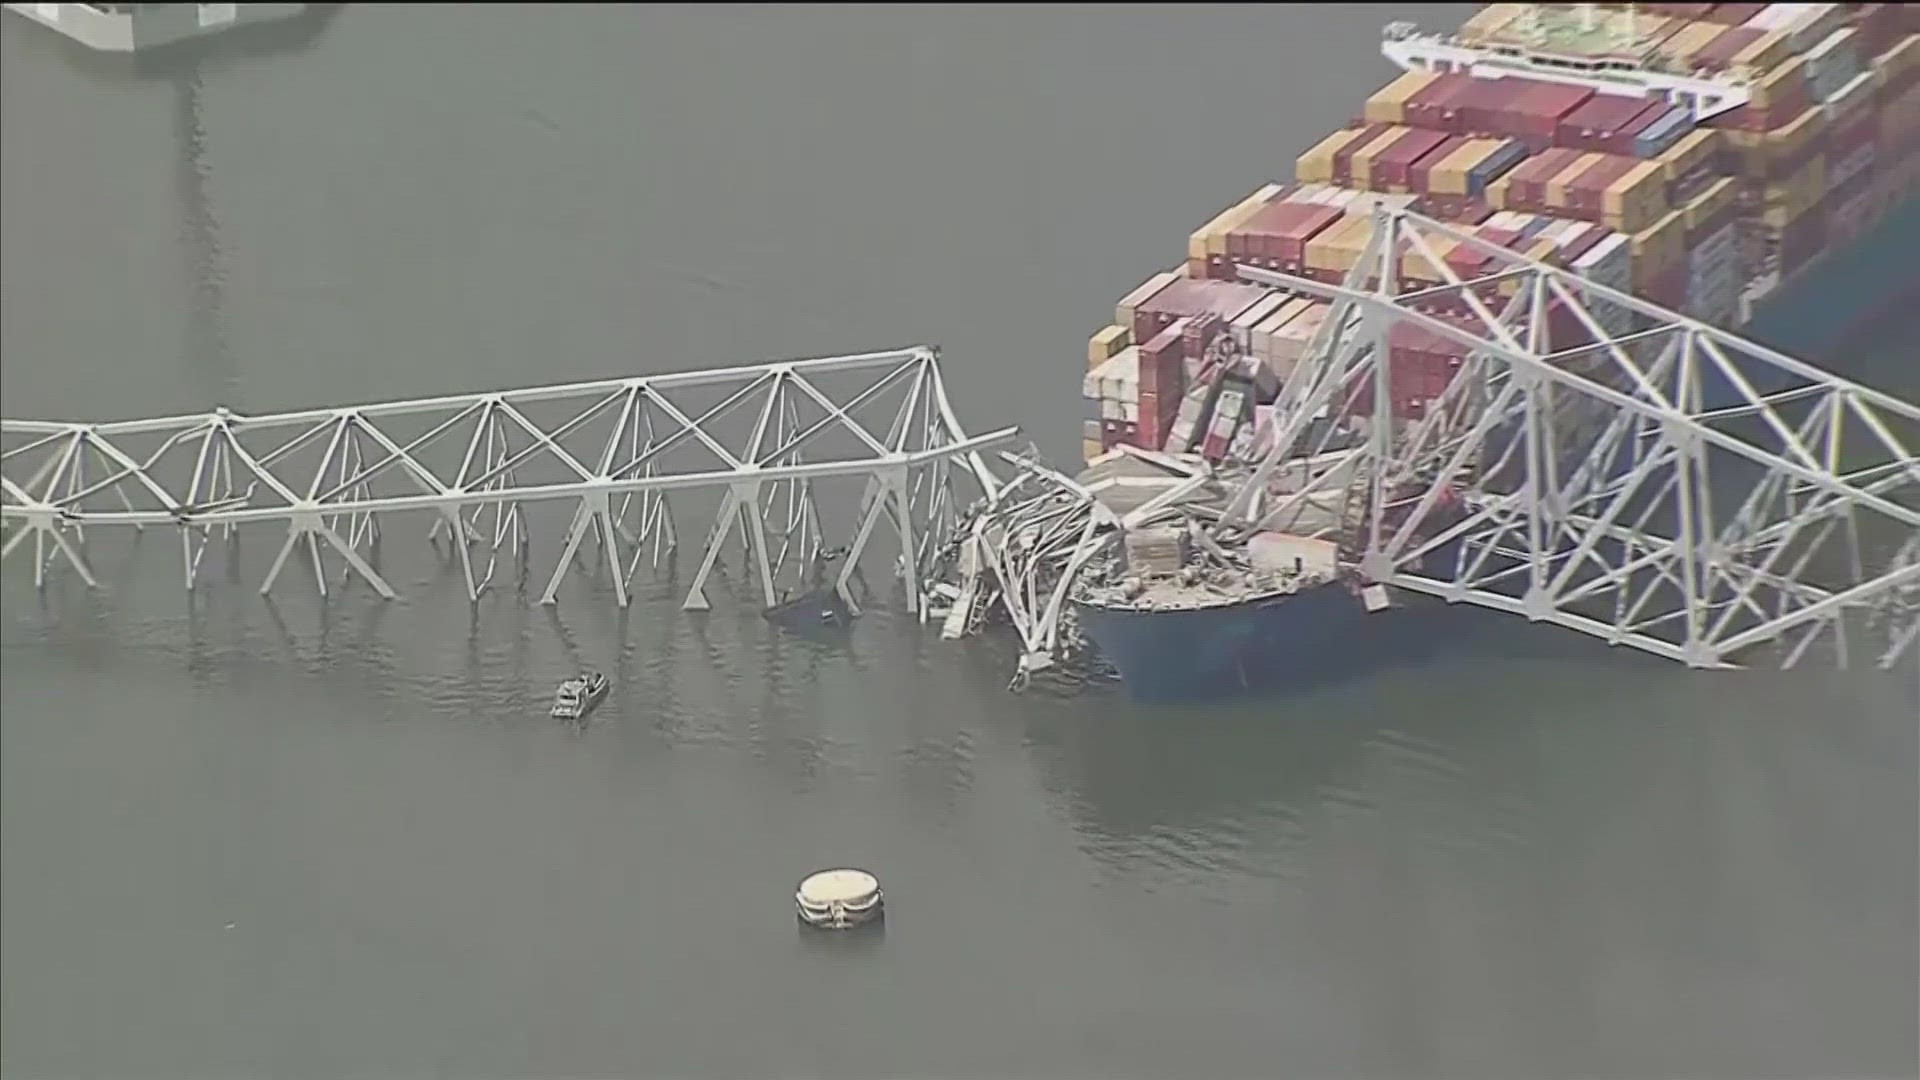 This comes as investigators try to piece together exactly what caused the ship to crash into the bridge.